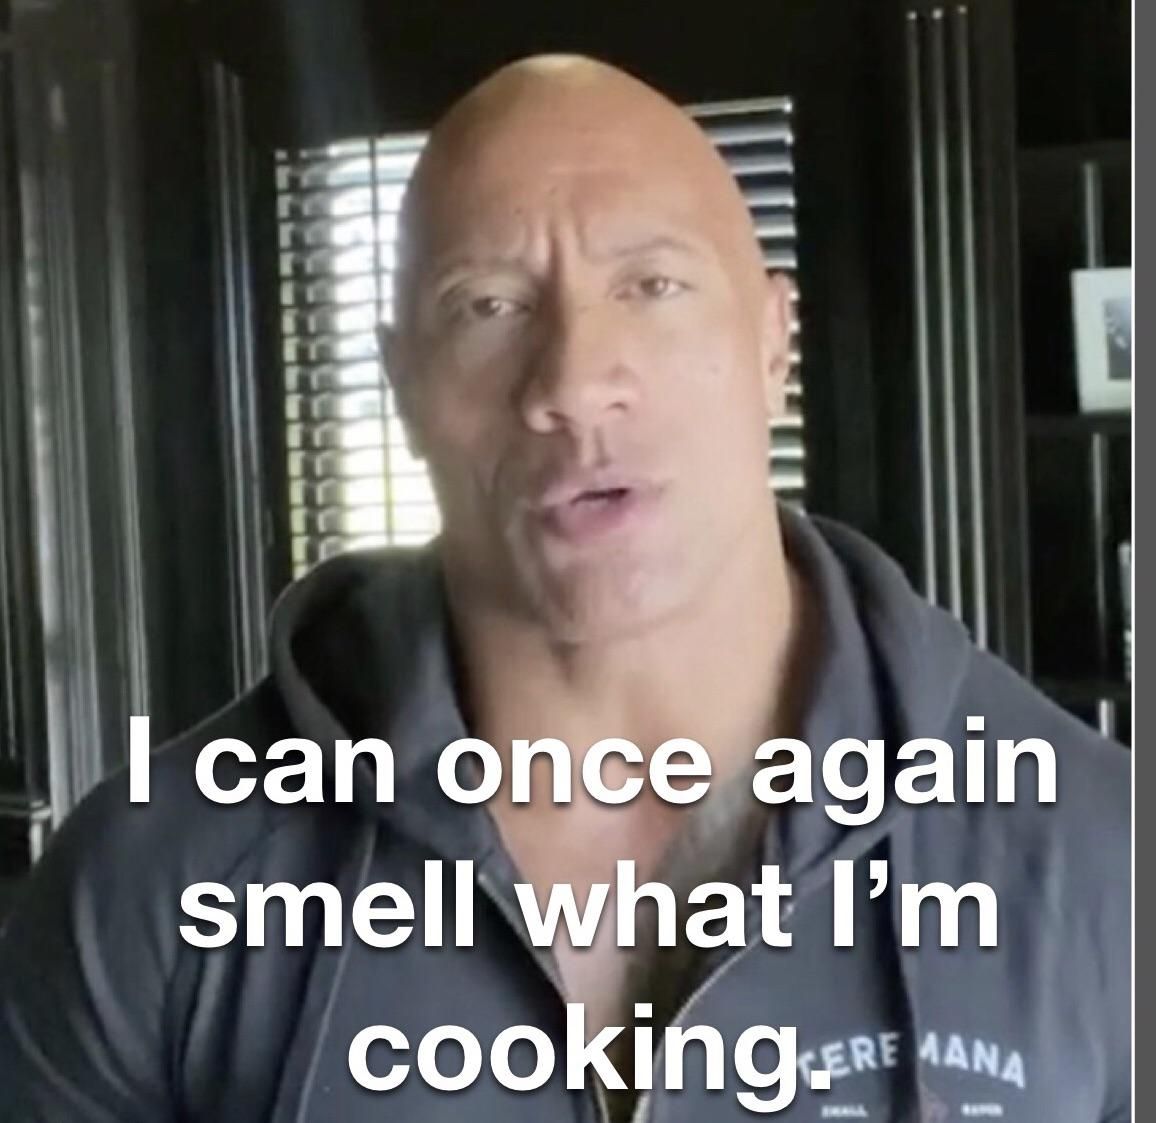 The Rock, Dwayne Johnson, explains the most important part of his Covid-19 recovery.